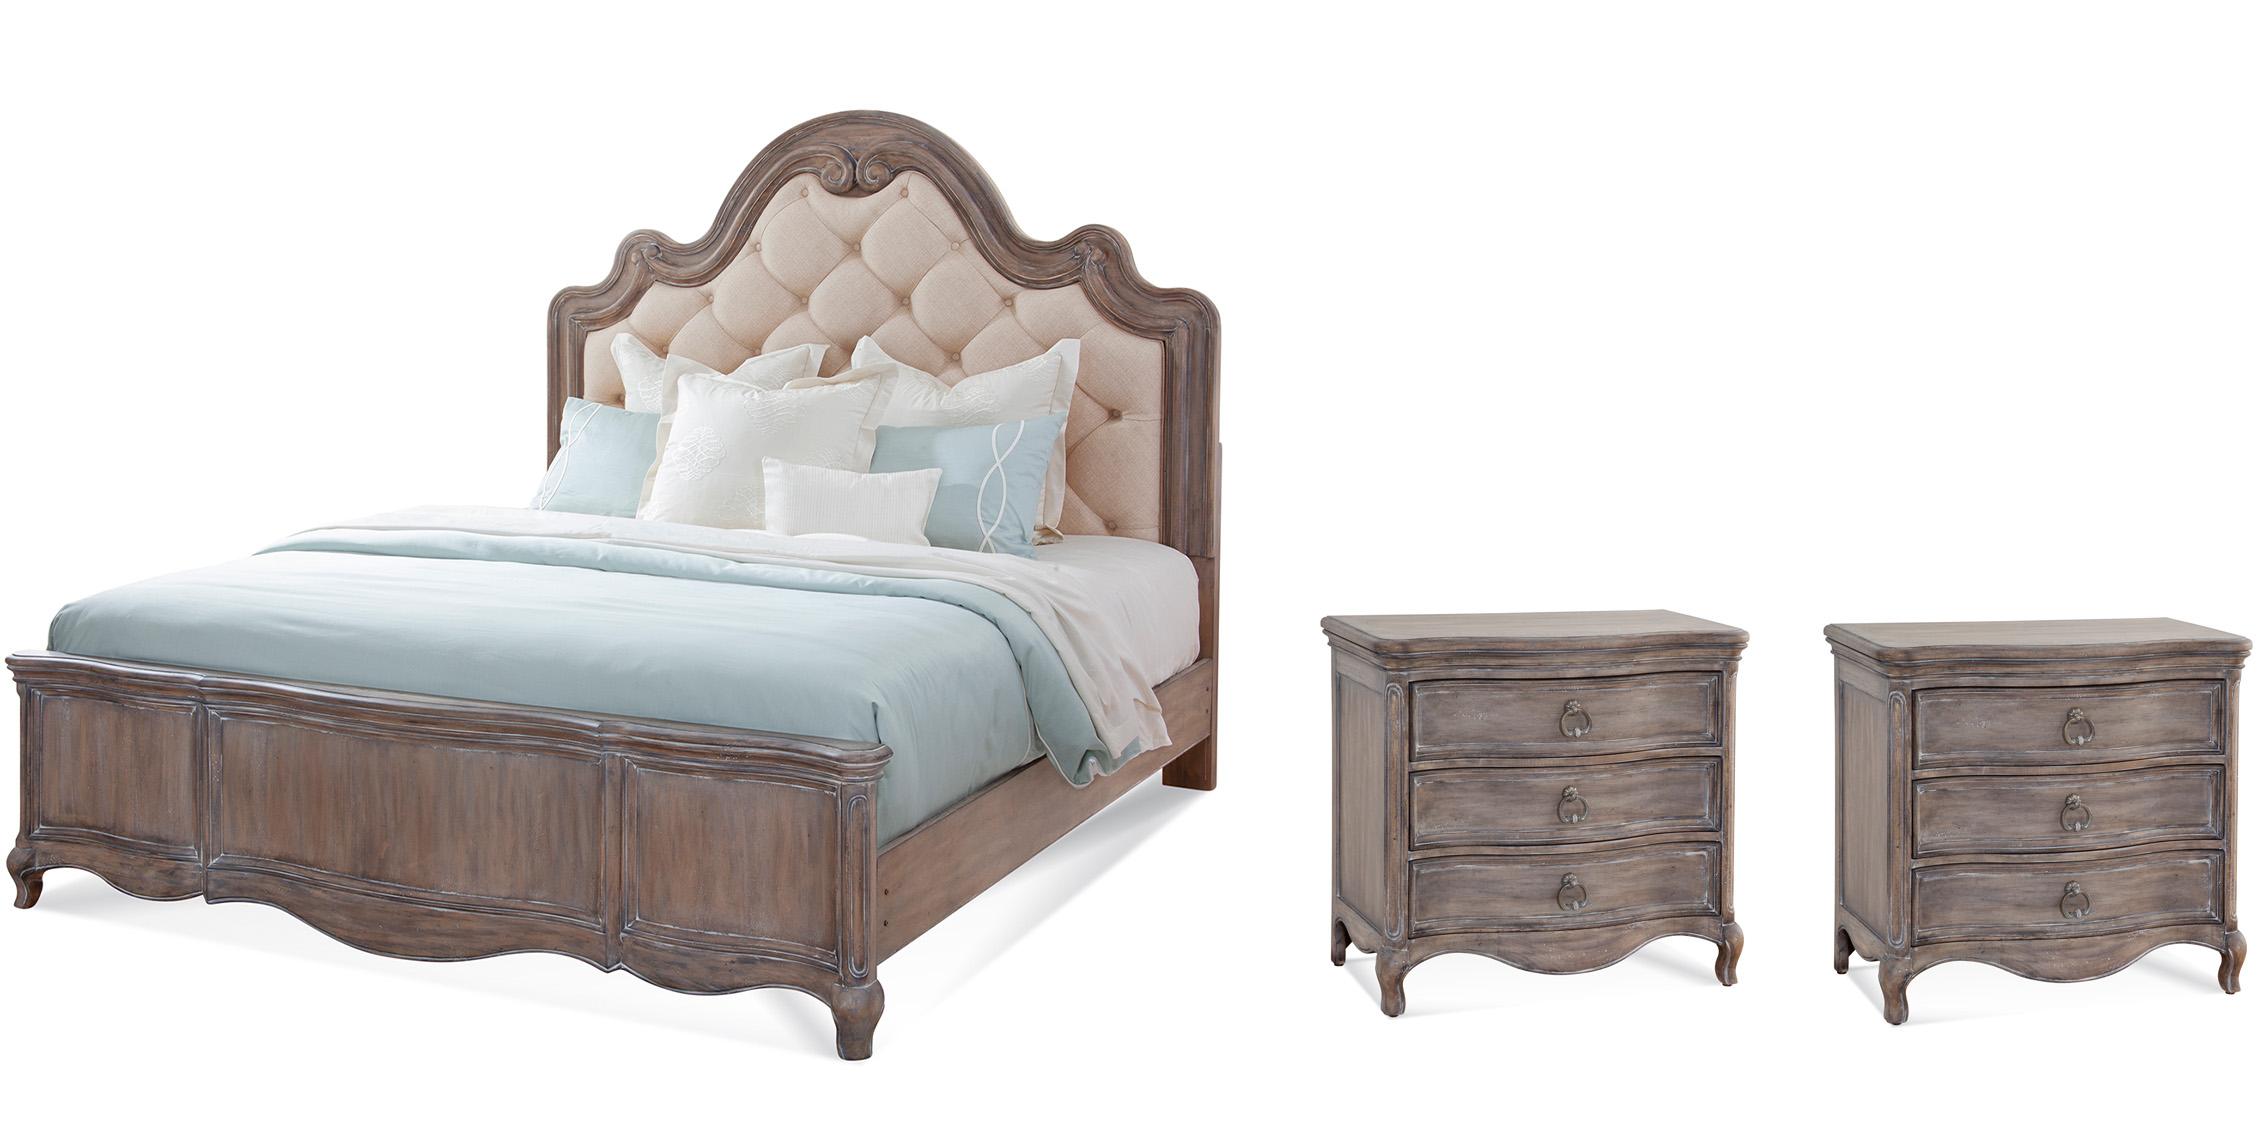 Classic, Traditional Panel Bedroom Set GENOA 1575-50TUPH-Set 1575-50TUPH-2N-3PC in Antique, Gray Fabric